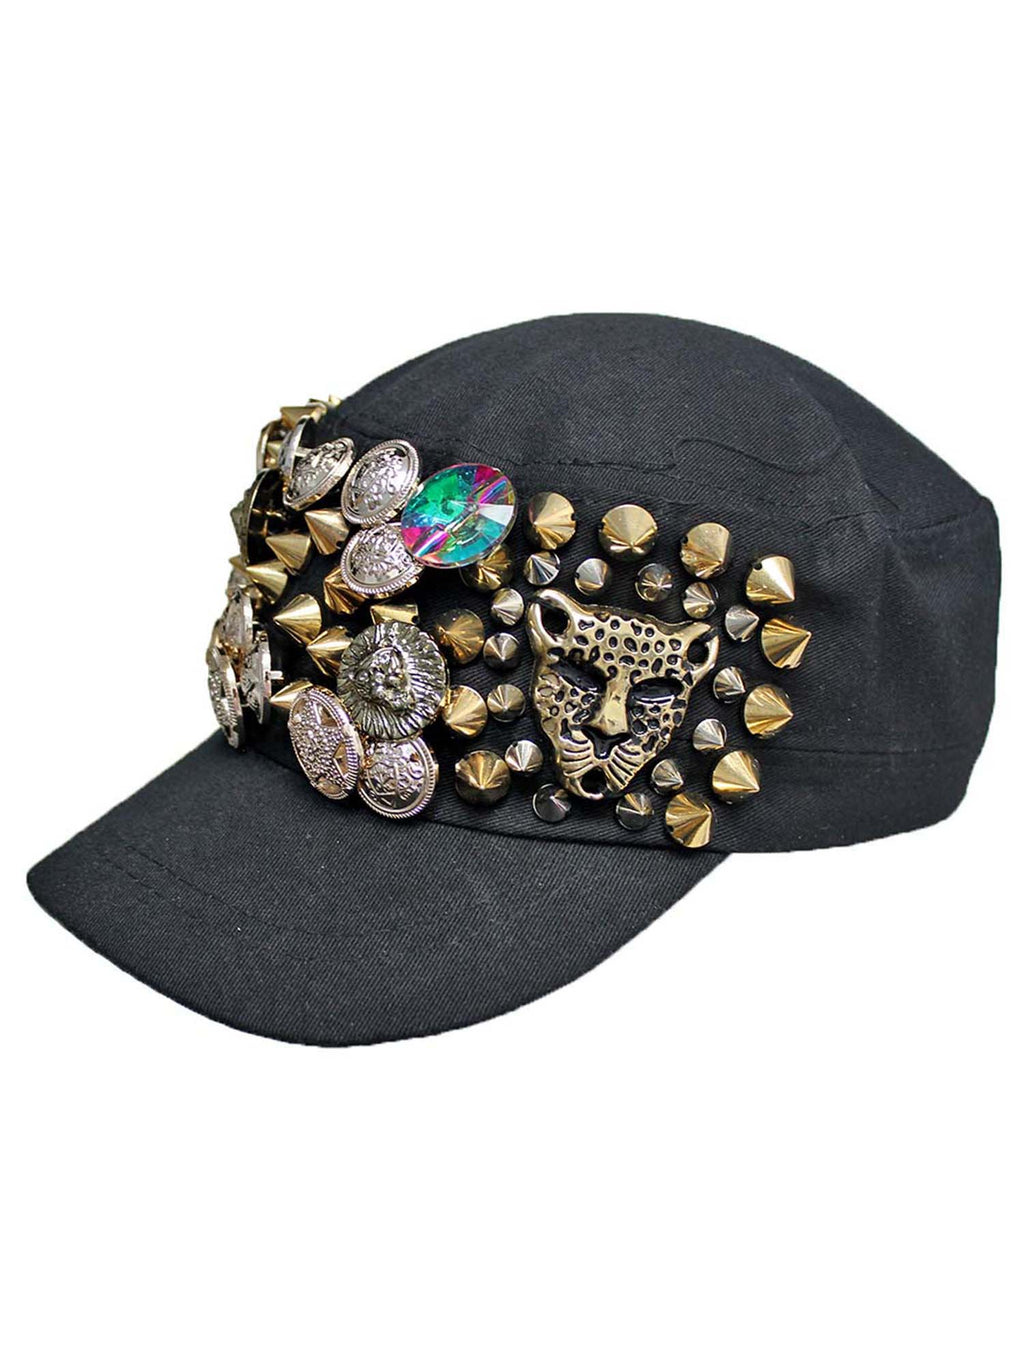 Black Cadet Cap Hat With Gold Spikes & Buttons